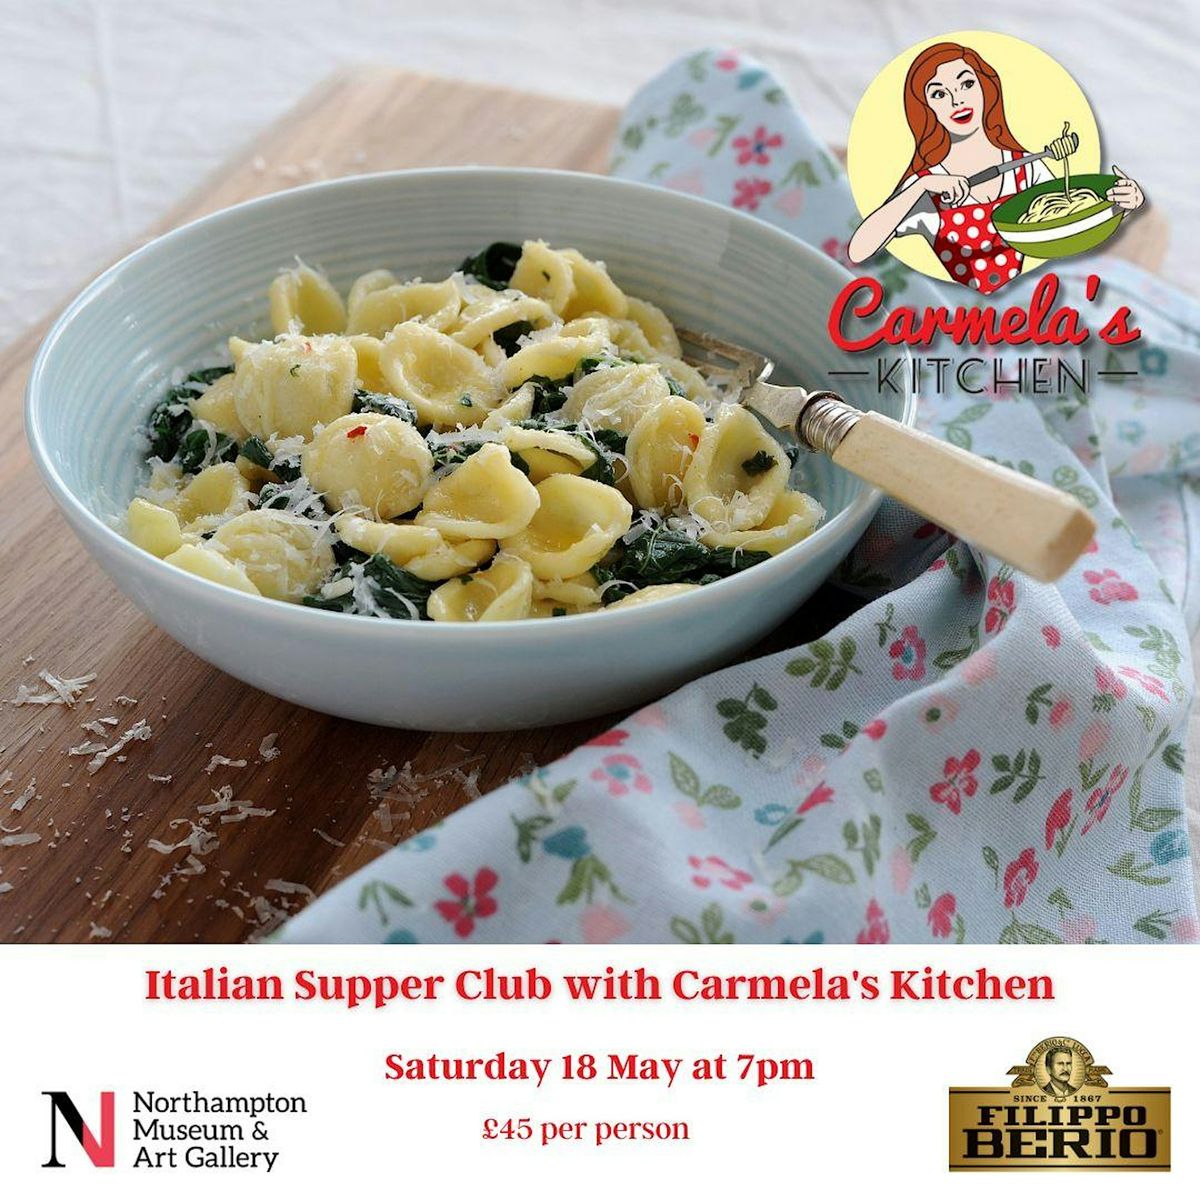 Italian Supper Club  in collaboration with Carmela's Kitchen